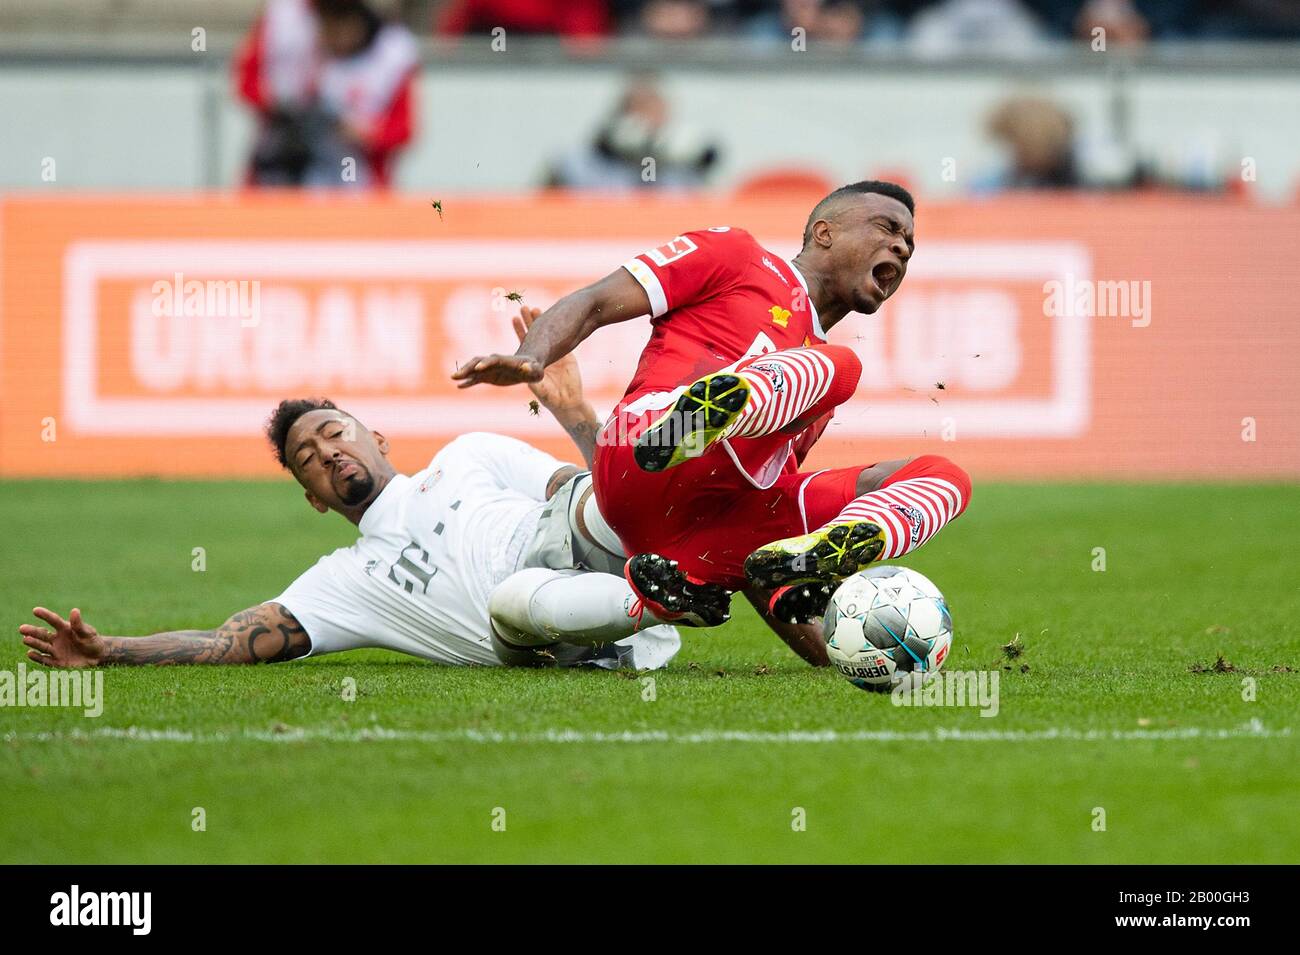 Jerome BOATENG l. (M) fouls Jhon CORDOBA (K) he sees for it the yellow card, AKtion, duels foul, soccer 1.Bundesliga, 22.matchday, FC Cologne (K) - FC Bayern Munich (M), on 16.02.2020 in Koeln / Germany. ¬ | usage worldwide Stock Photo